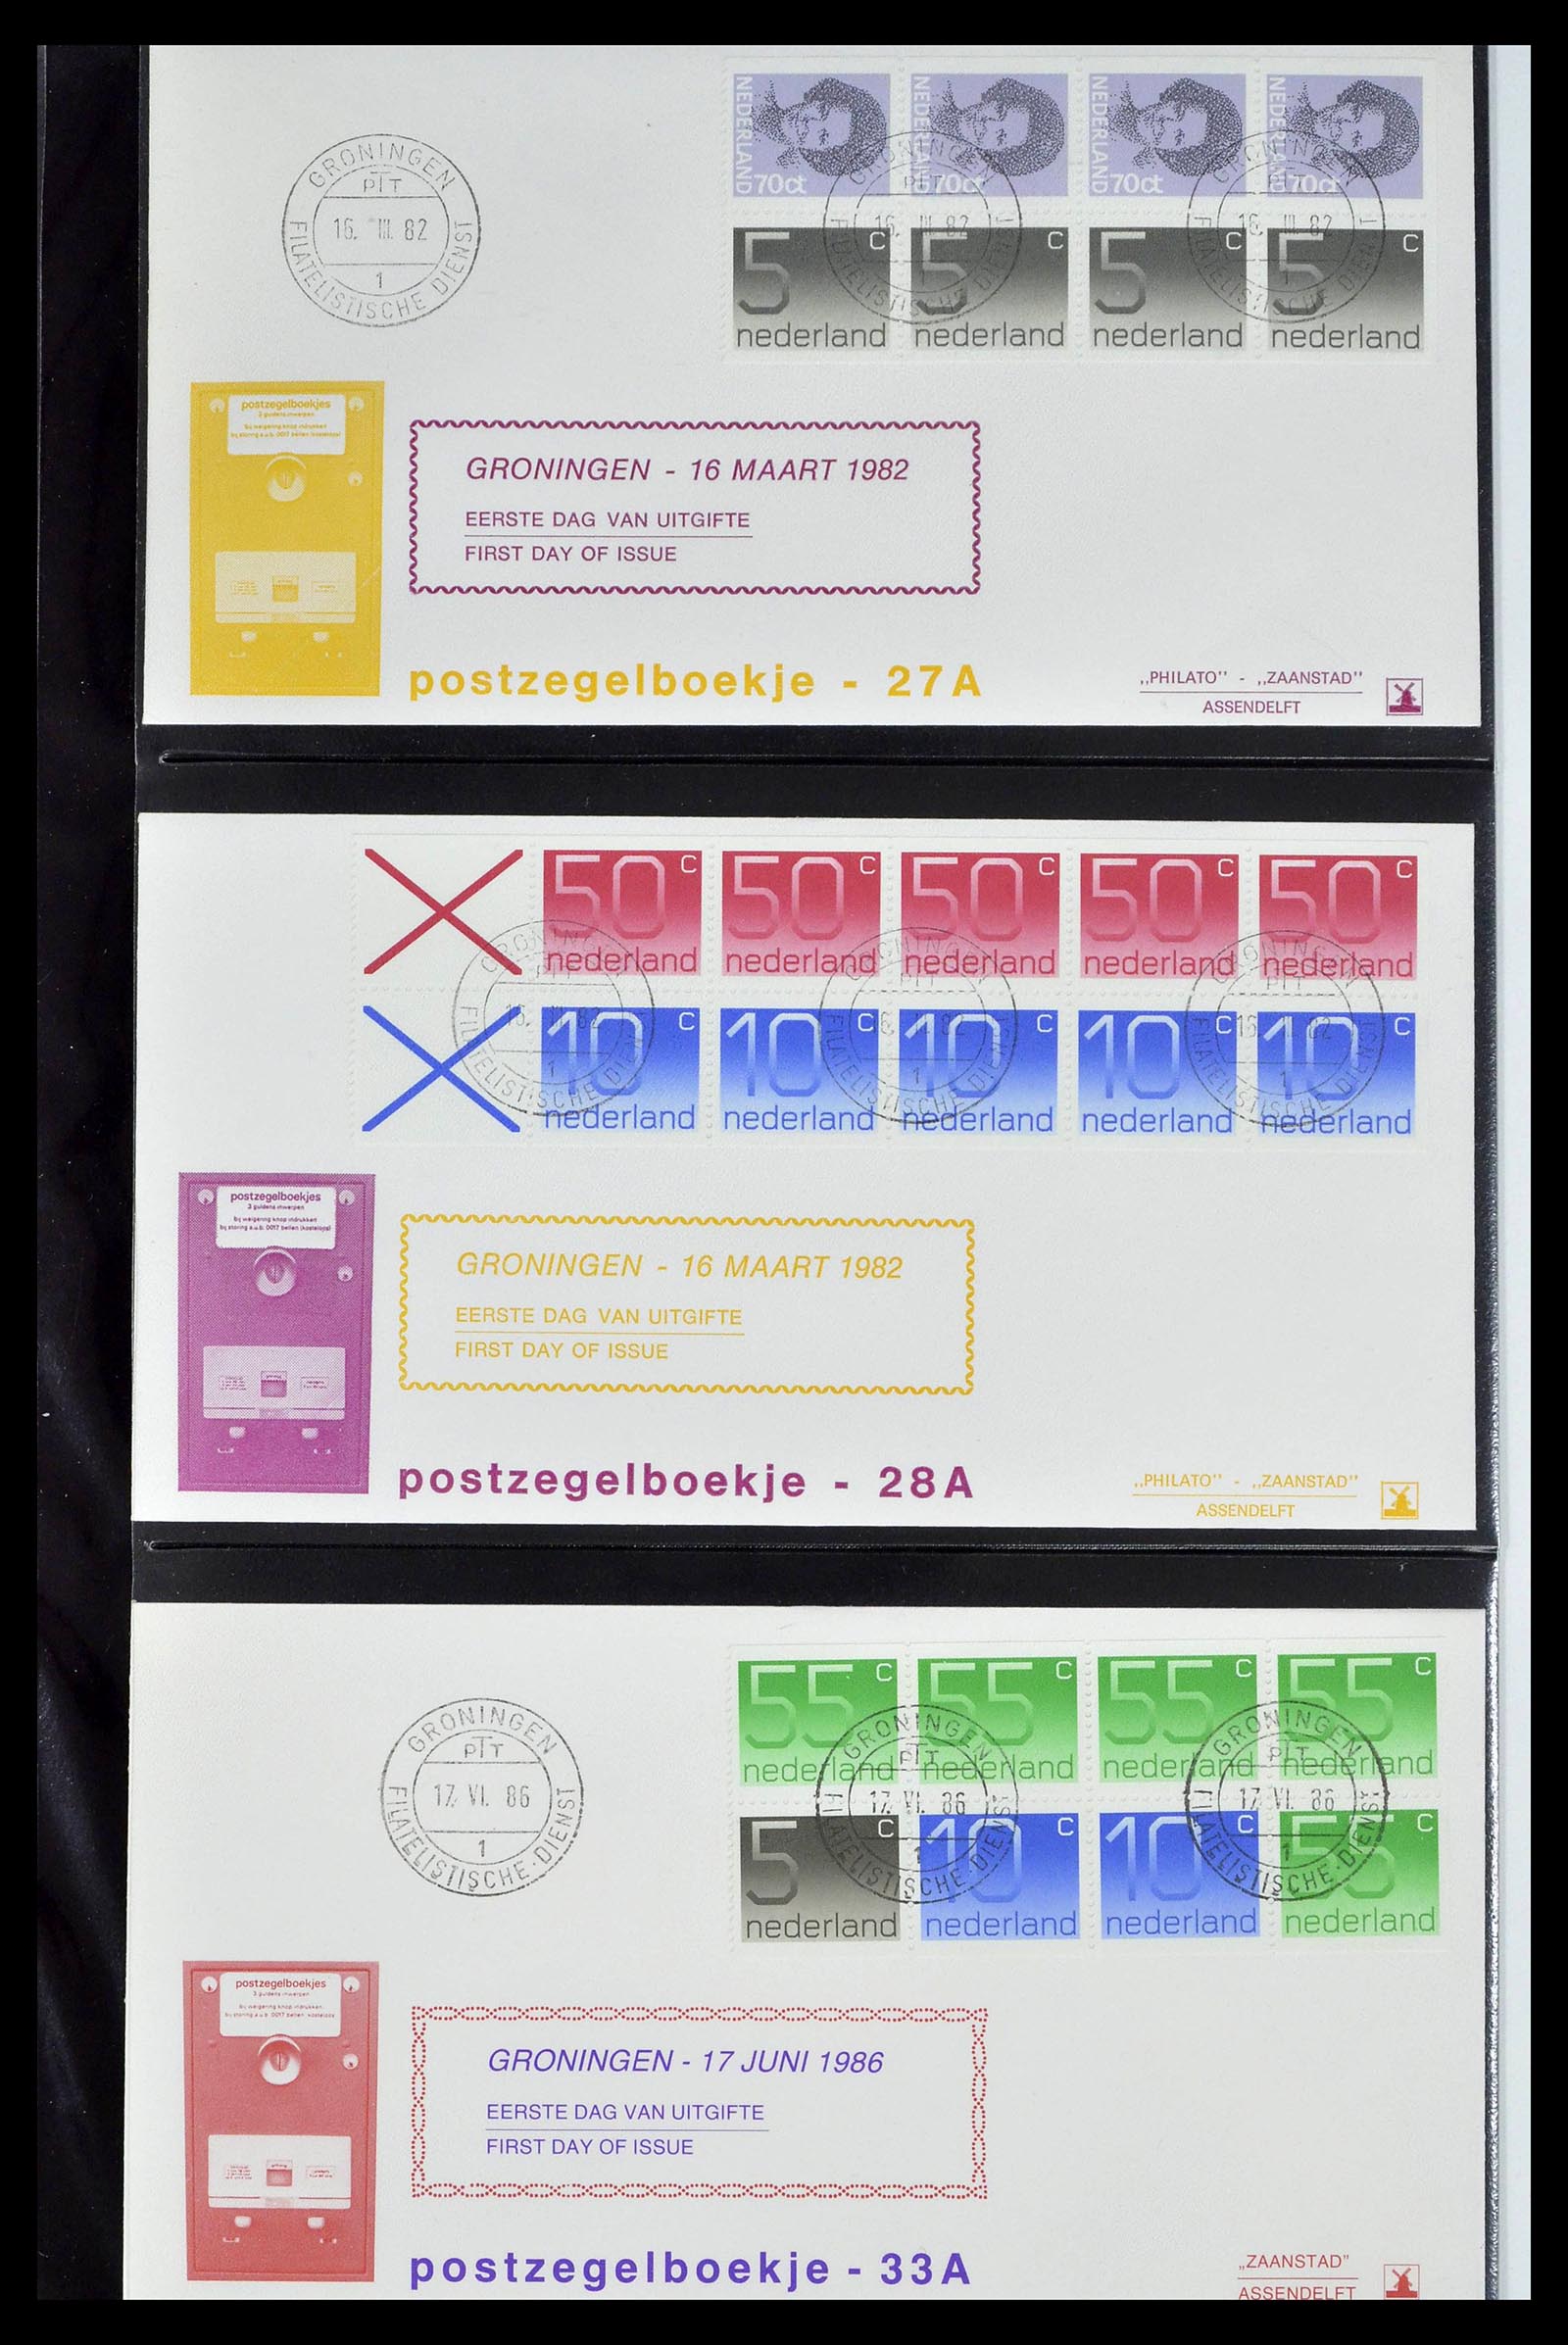 38559 0547 - Stamp collection 38559 Netherlands special first day covers.